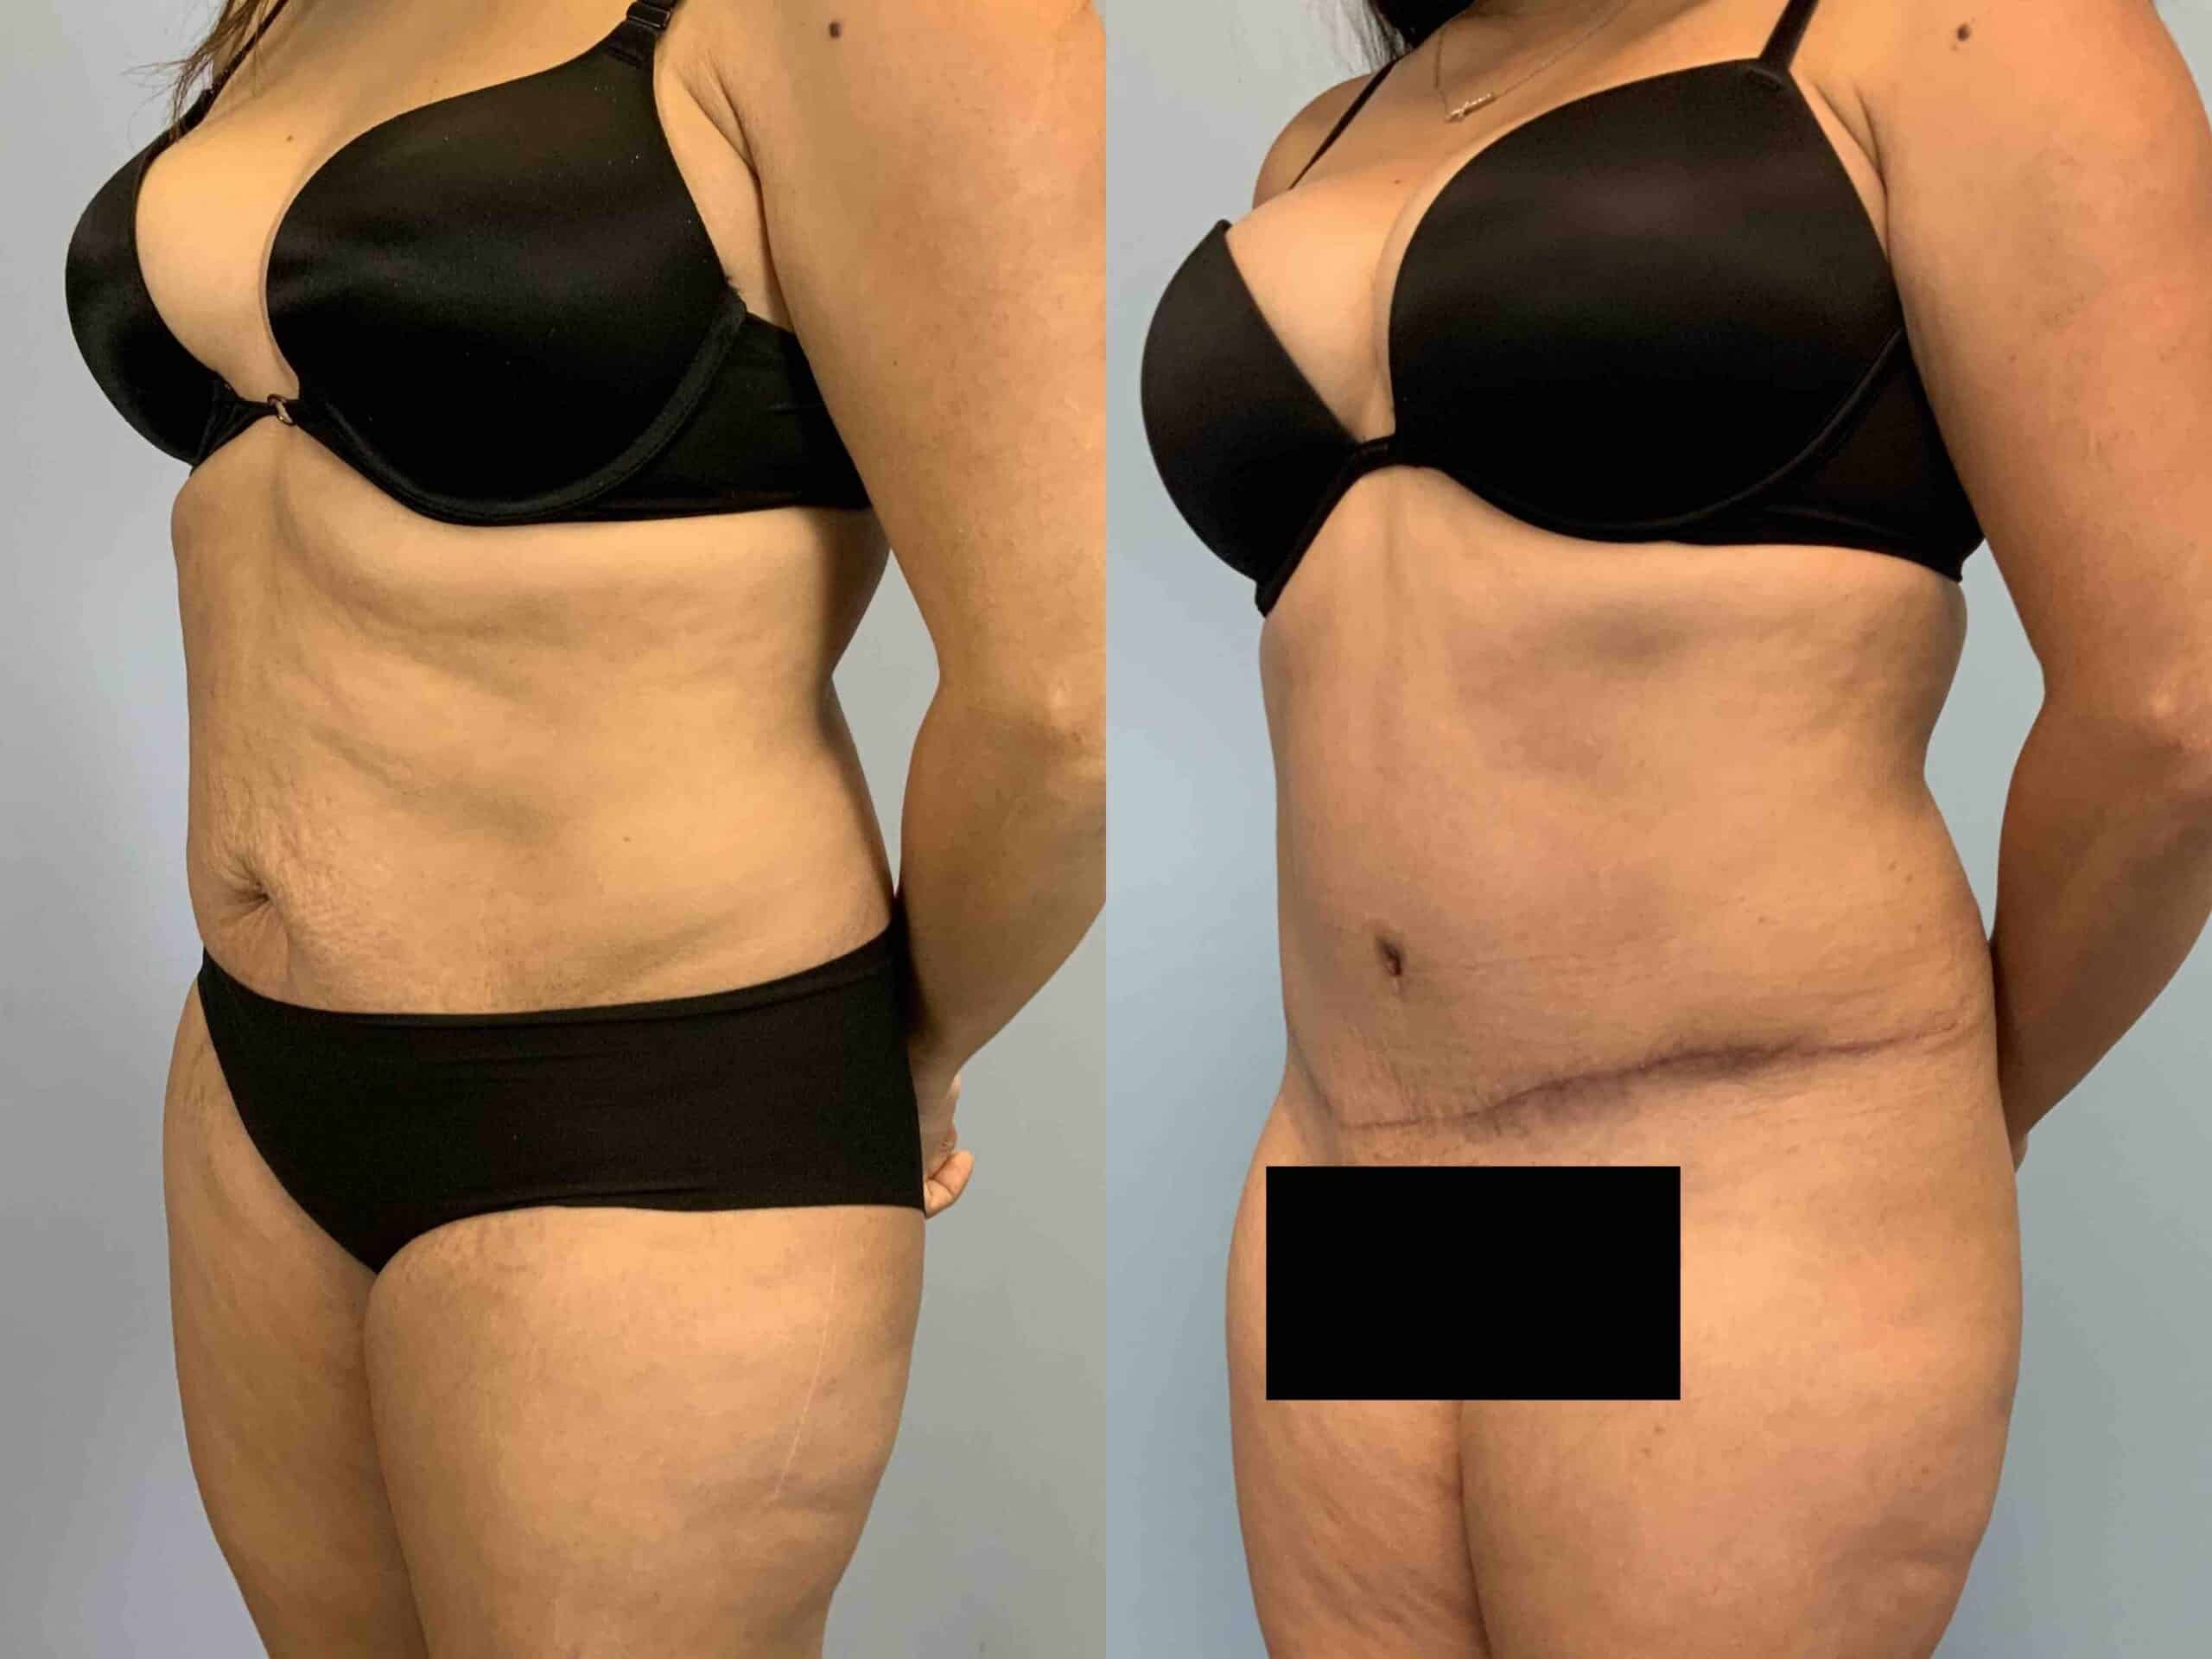 Before and after, 2 mo post op from tummy tuck performed by Dr. Paul Vanek (diagonal view)